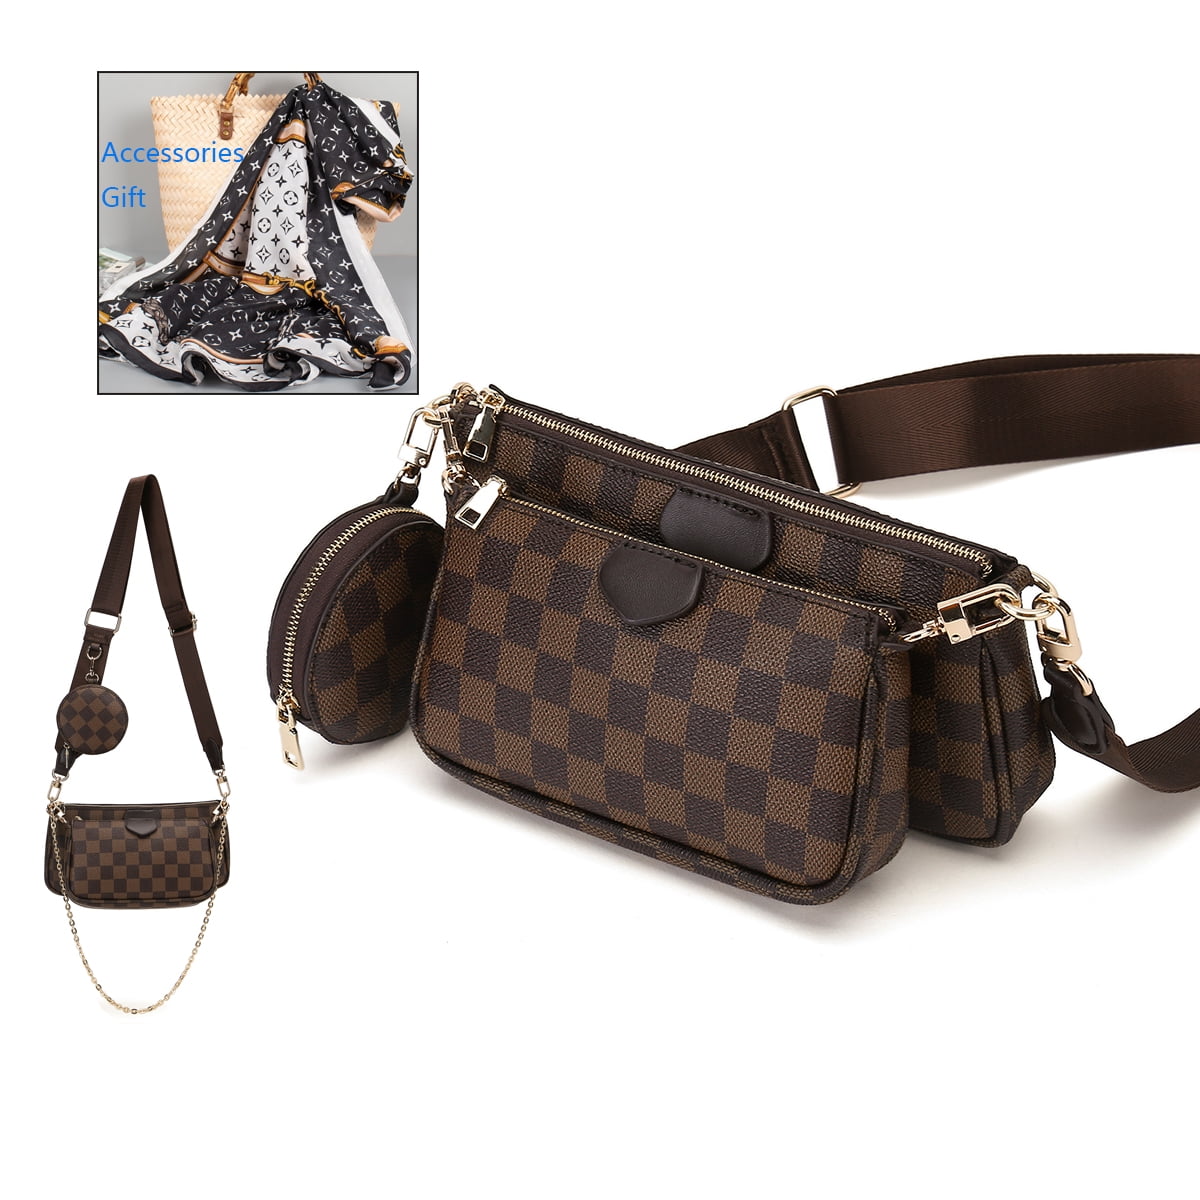 LV crossover bag  Crossover bags, Bags, Louis vuitton bag